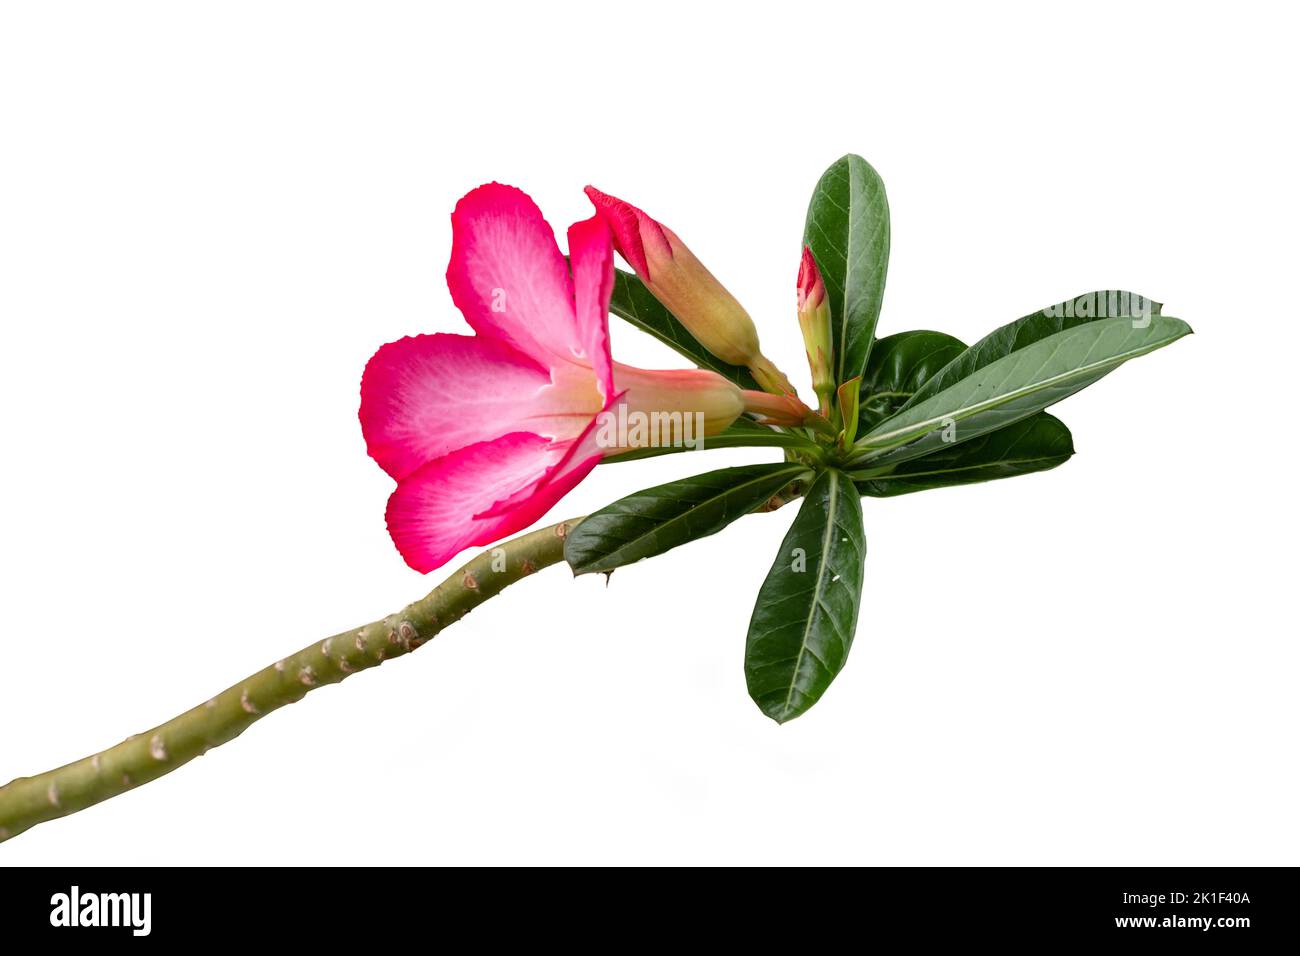 Adenium flower stalks that are blooming are red and pink with fresh green leaves, isolated on a white background Stock Photo